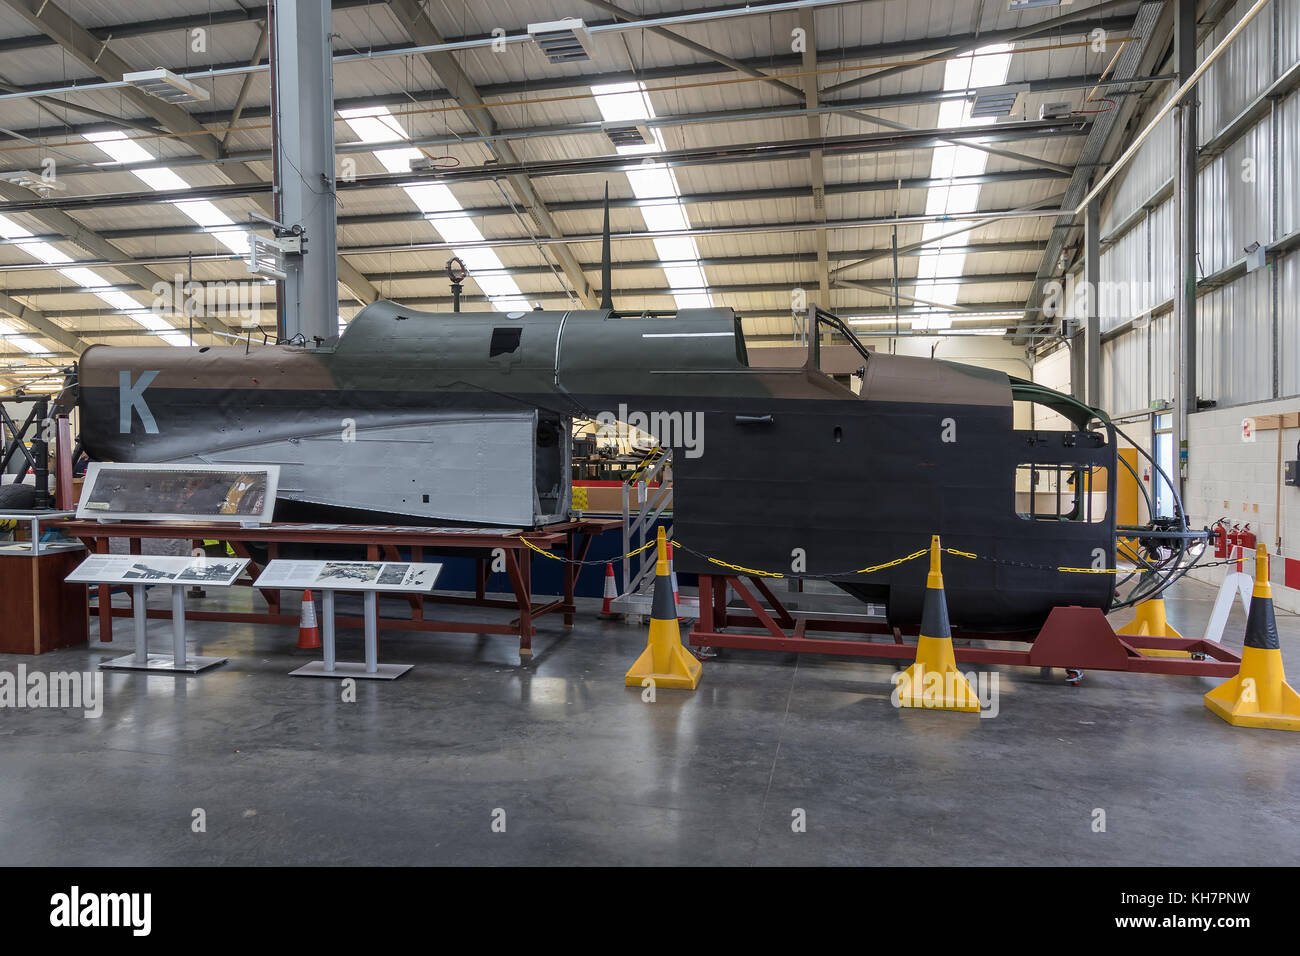 RAF Cosford, UK . 15th Nov, 2017. November, the RAF Museum's Conservation Centre opens its doors to visitors for access to aircraft in the conservation hangar. Visitors are able to view behind-the-scenes progress on a range of aircraft which this year includes an ex Red Arrows Gnat, Lysander, LVG, Wellington Bomber and Hampden Bomber along with other objects and artefacts including a Range Safety Launch. Credit: Paul Bunch/Alamy Live News Stock Photo